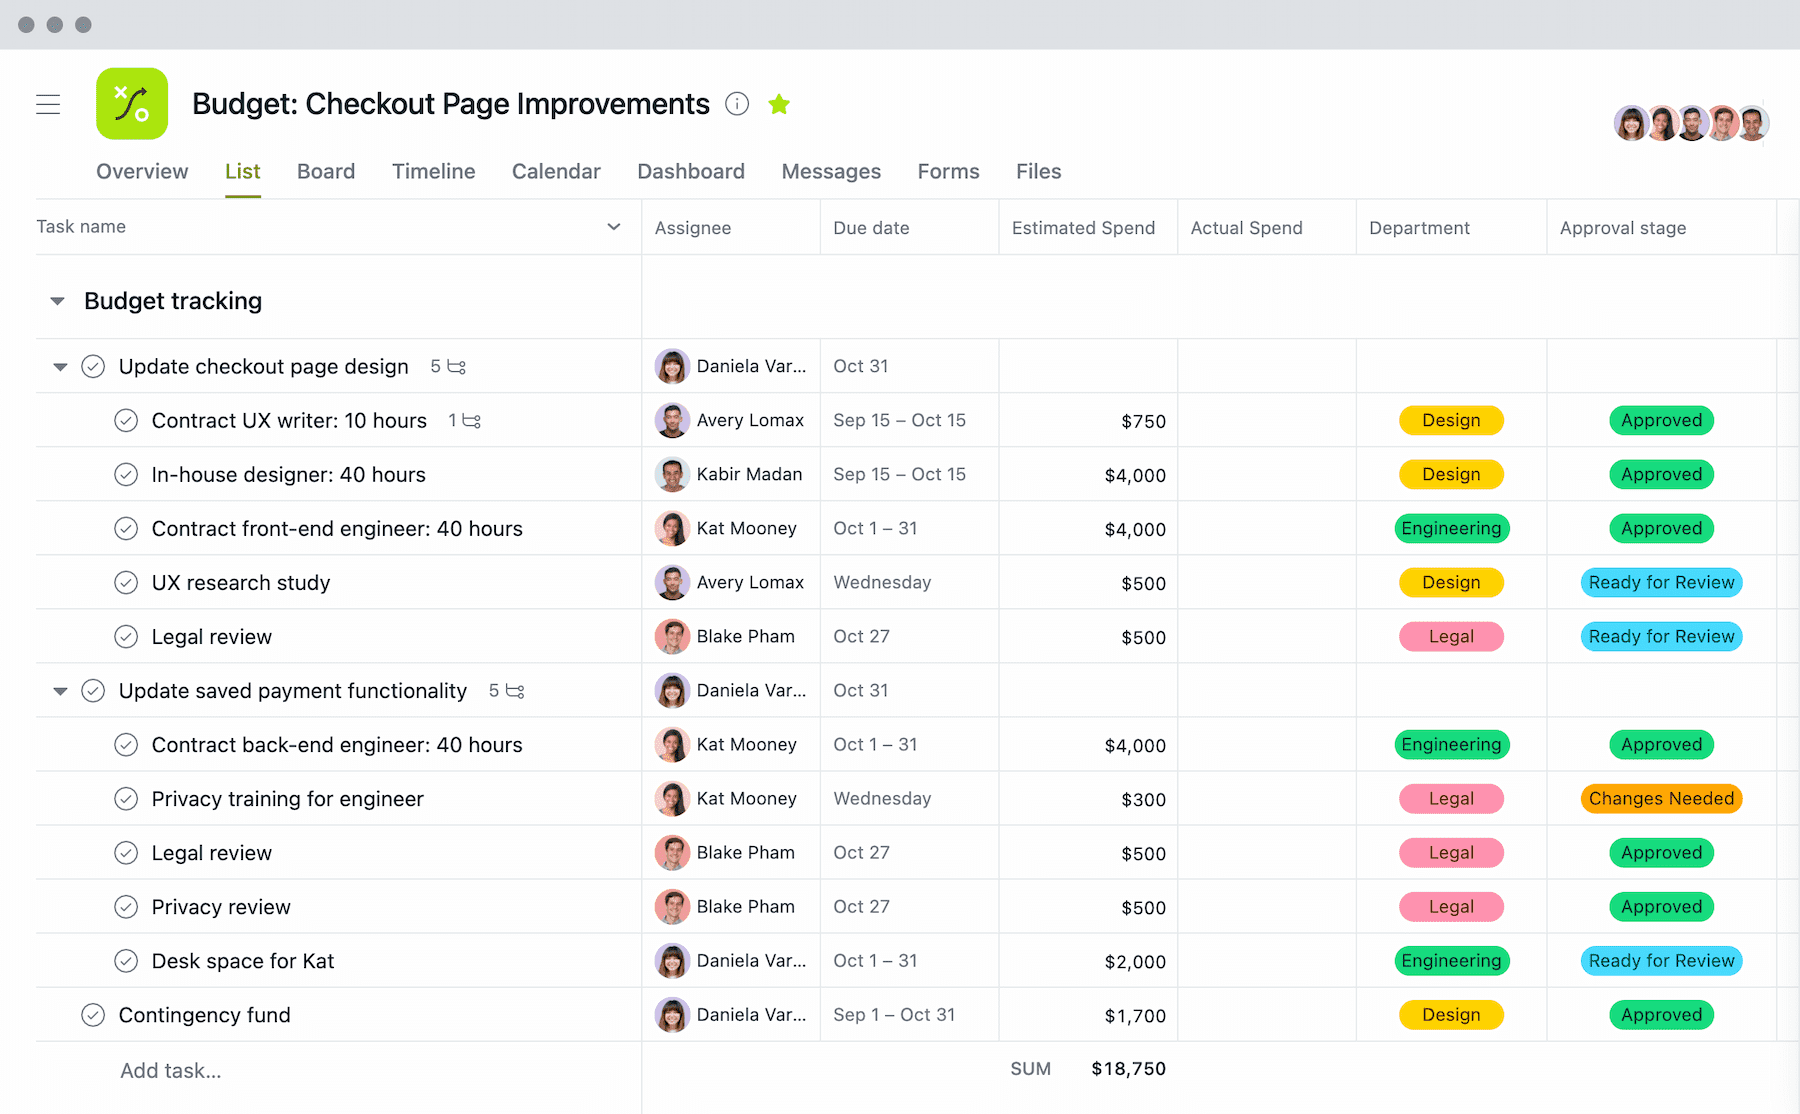 [Product UI] Project budget example (lists)